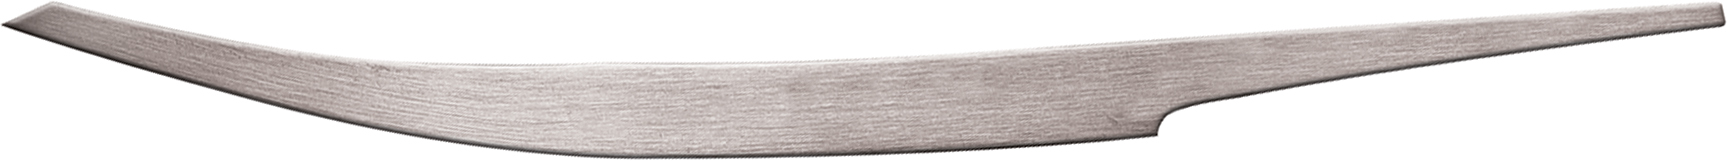 GRS lining graver No. 16-6, curved shape